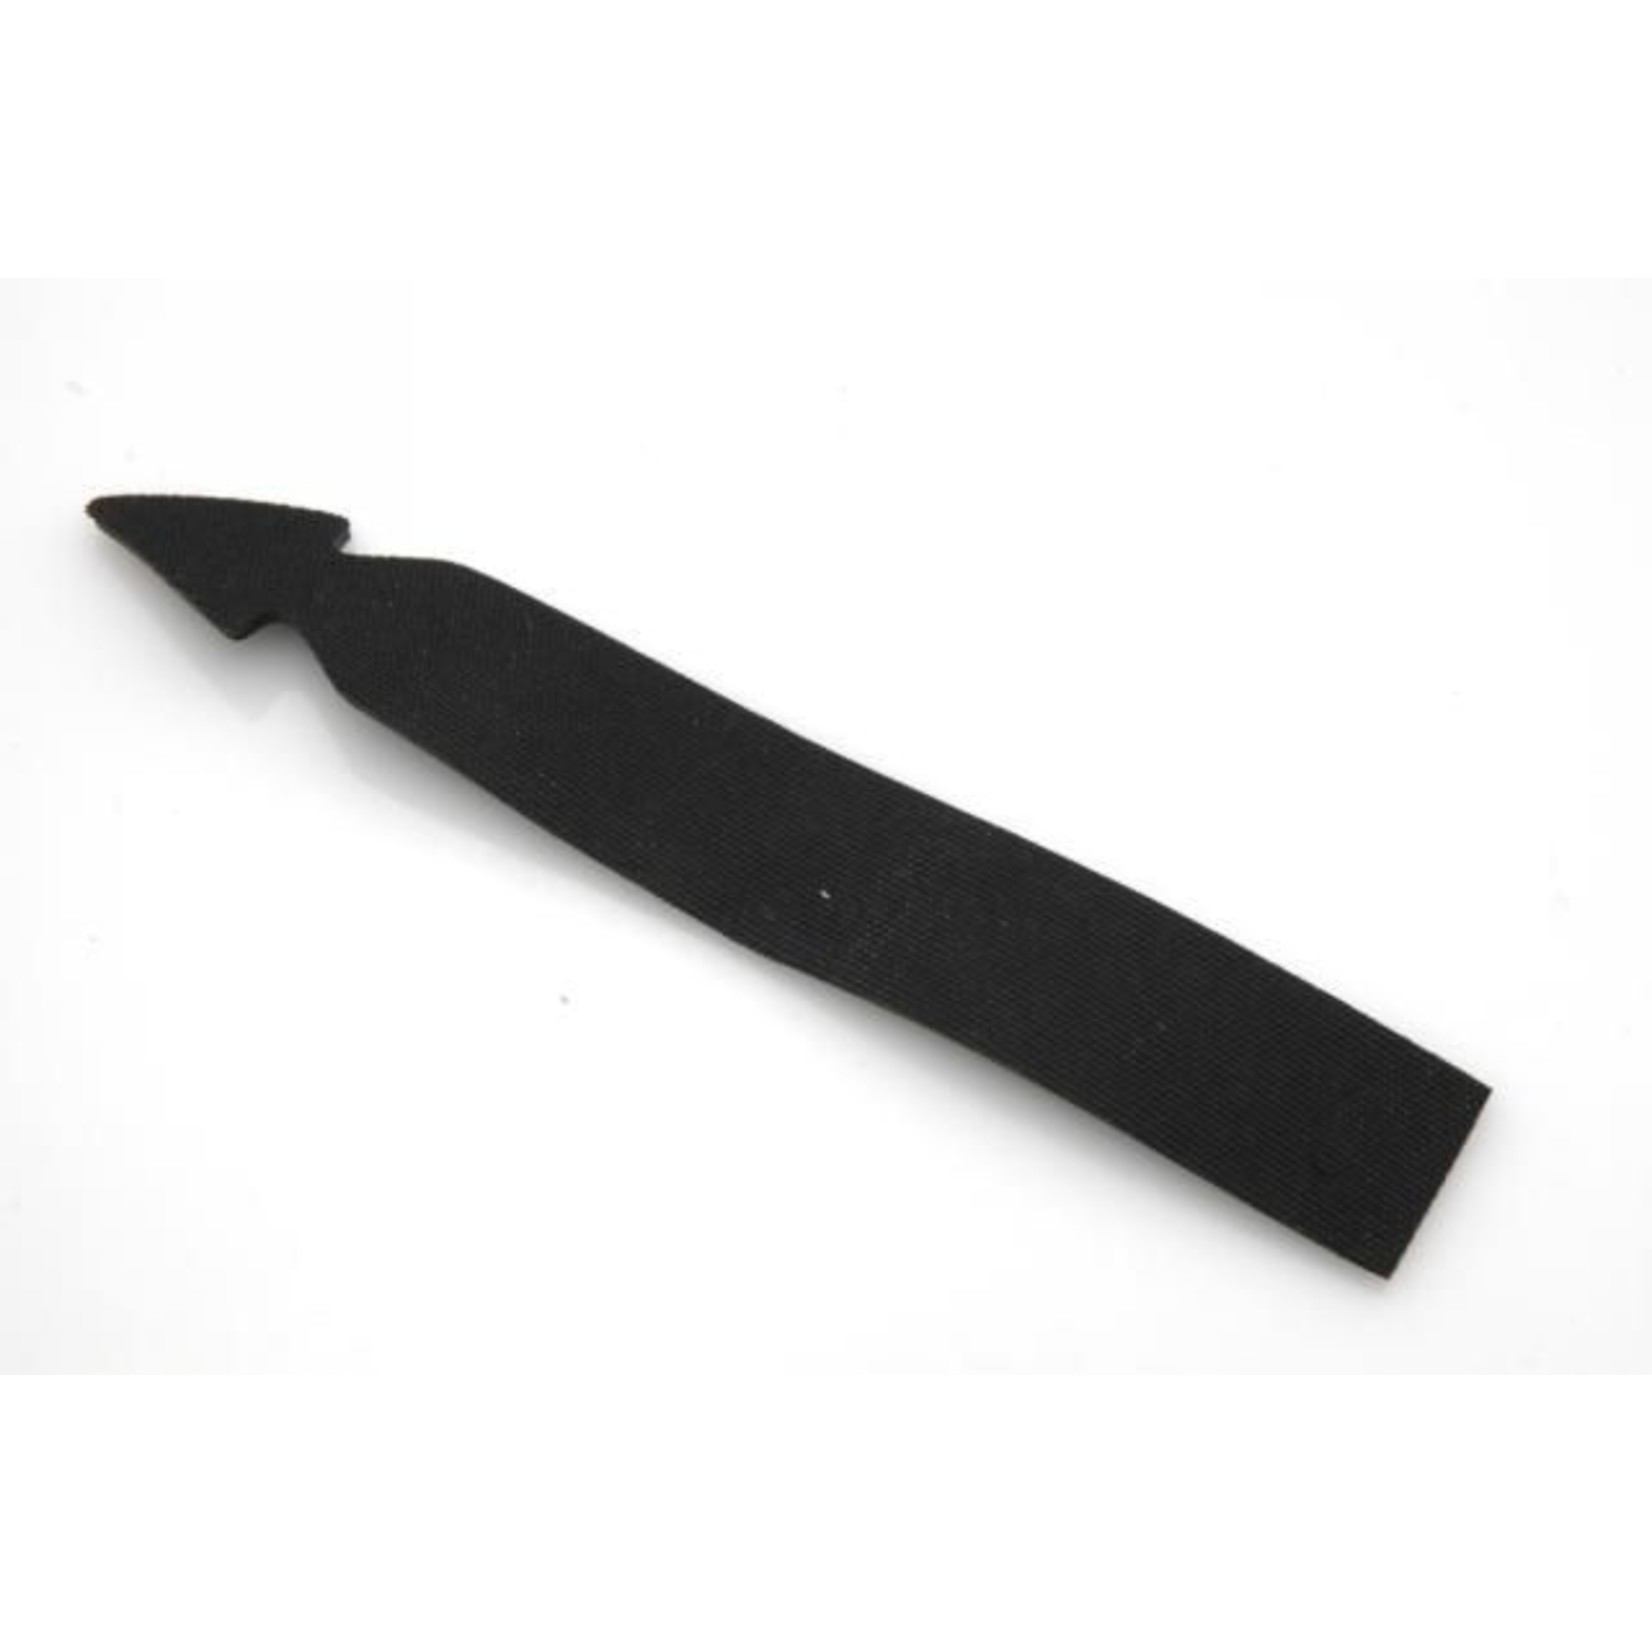 Rubber tie-wrap 160 x 24mm Nr Org: 5412350